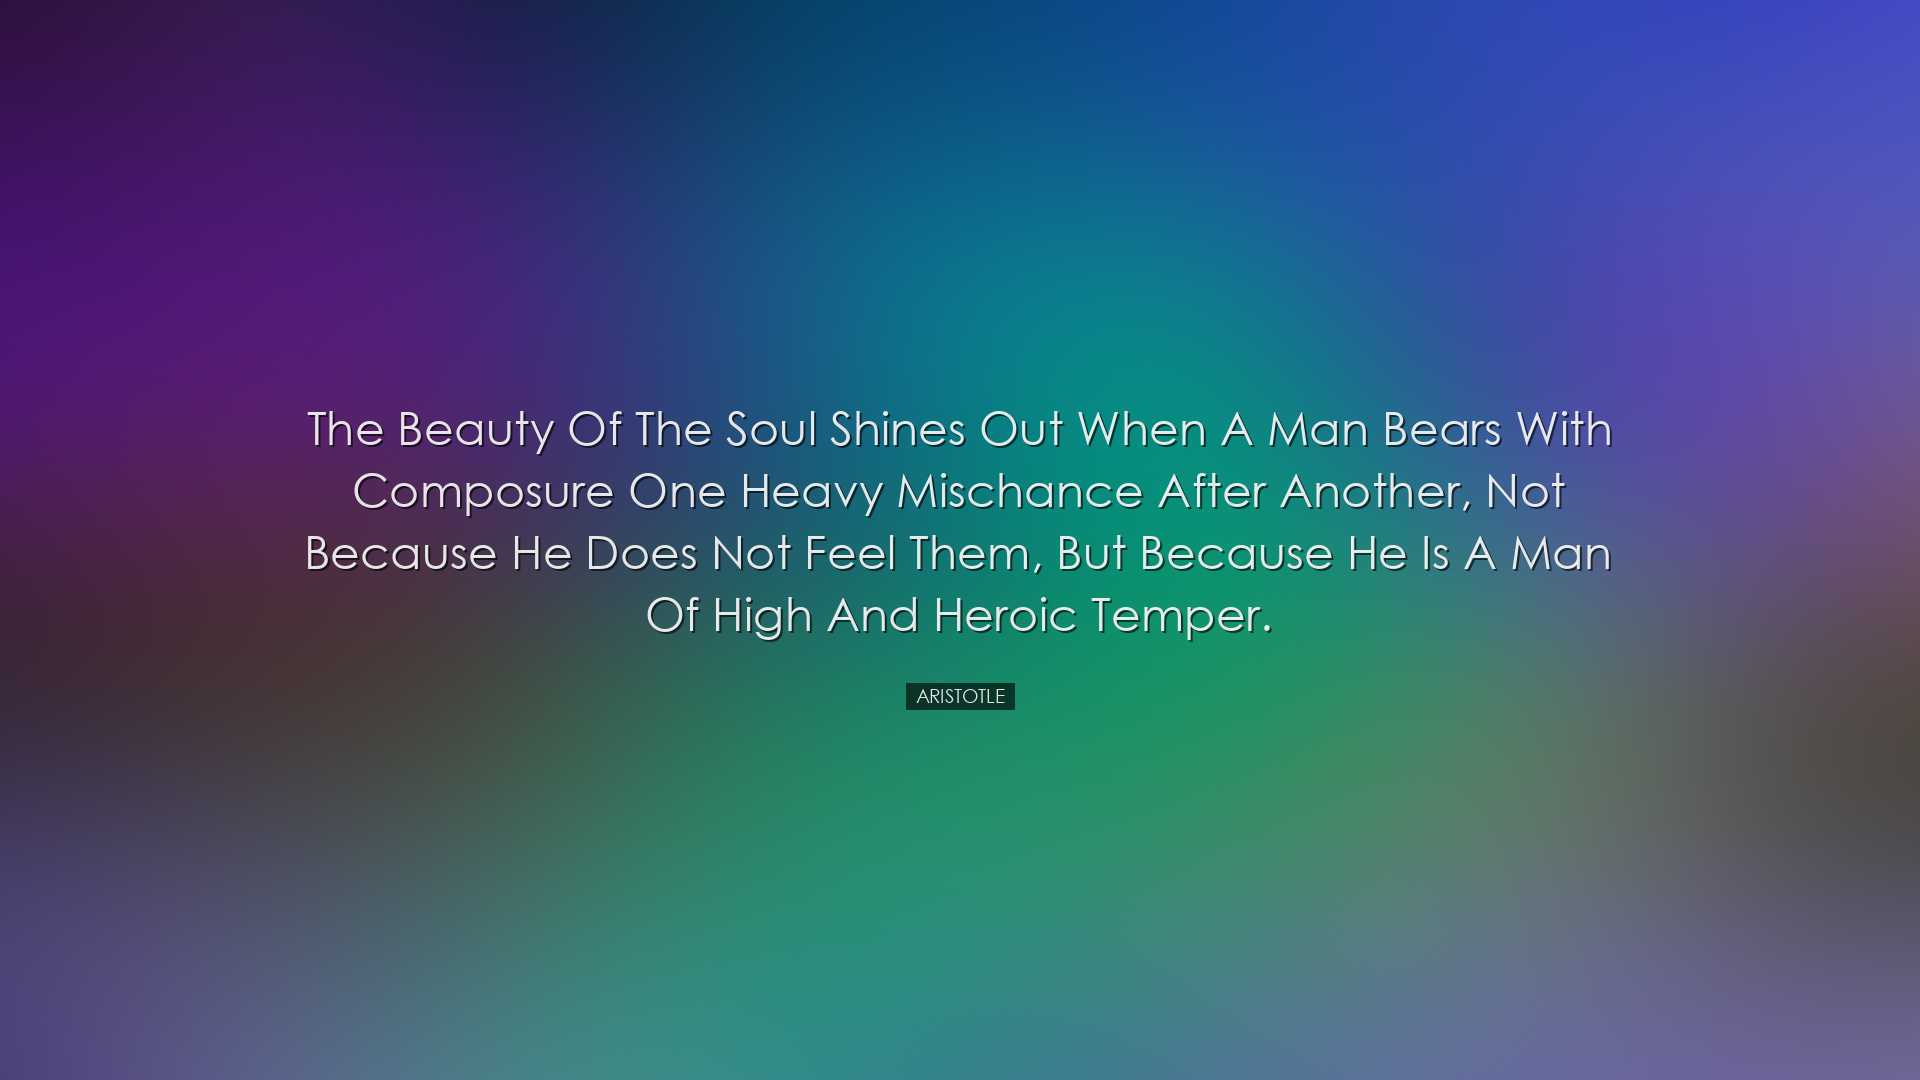 The beauty of the soul shines out when a man bears with composure